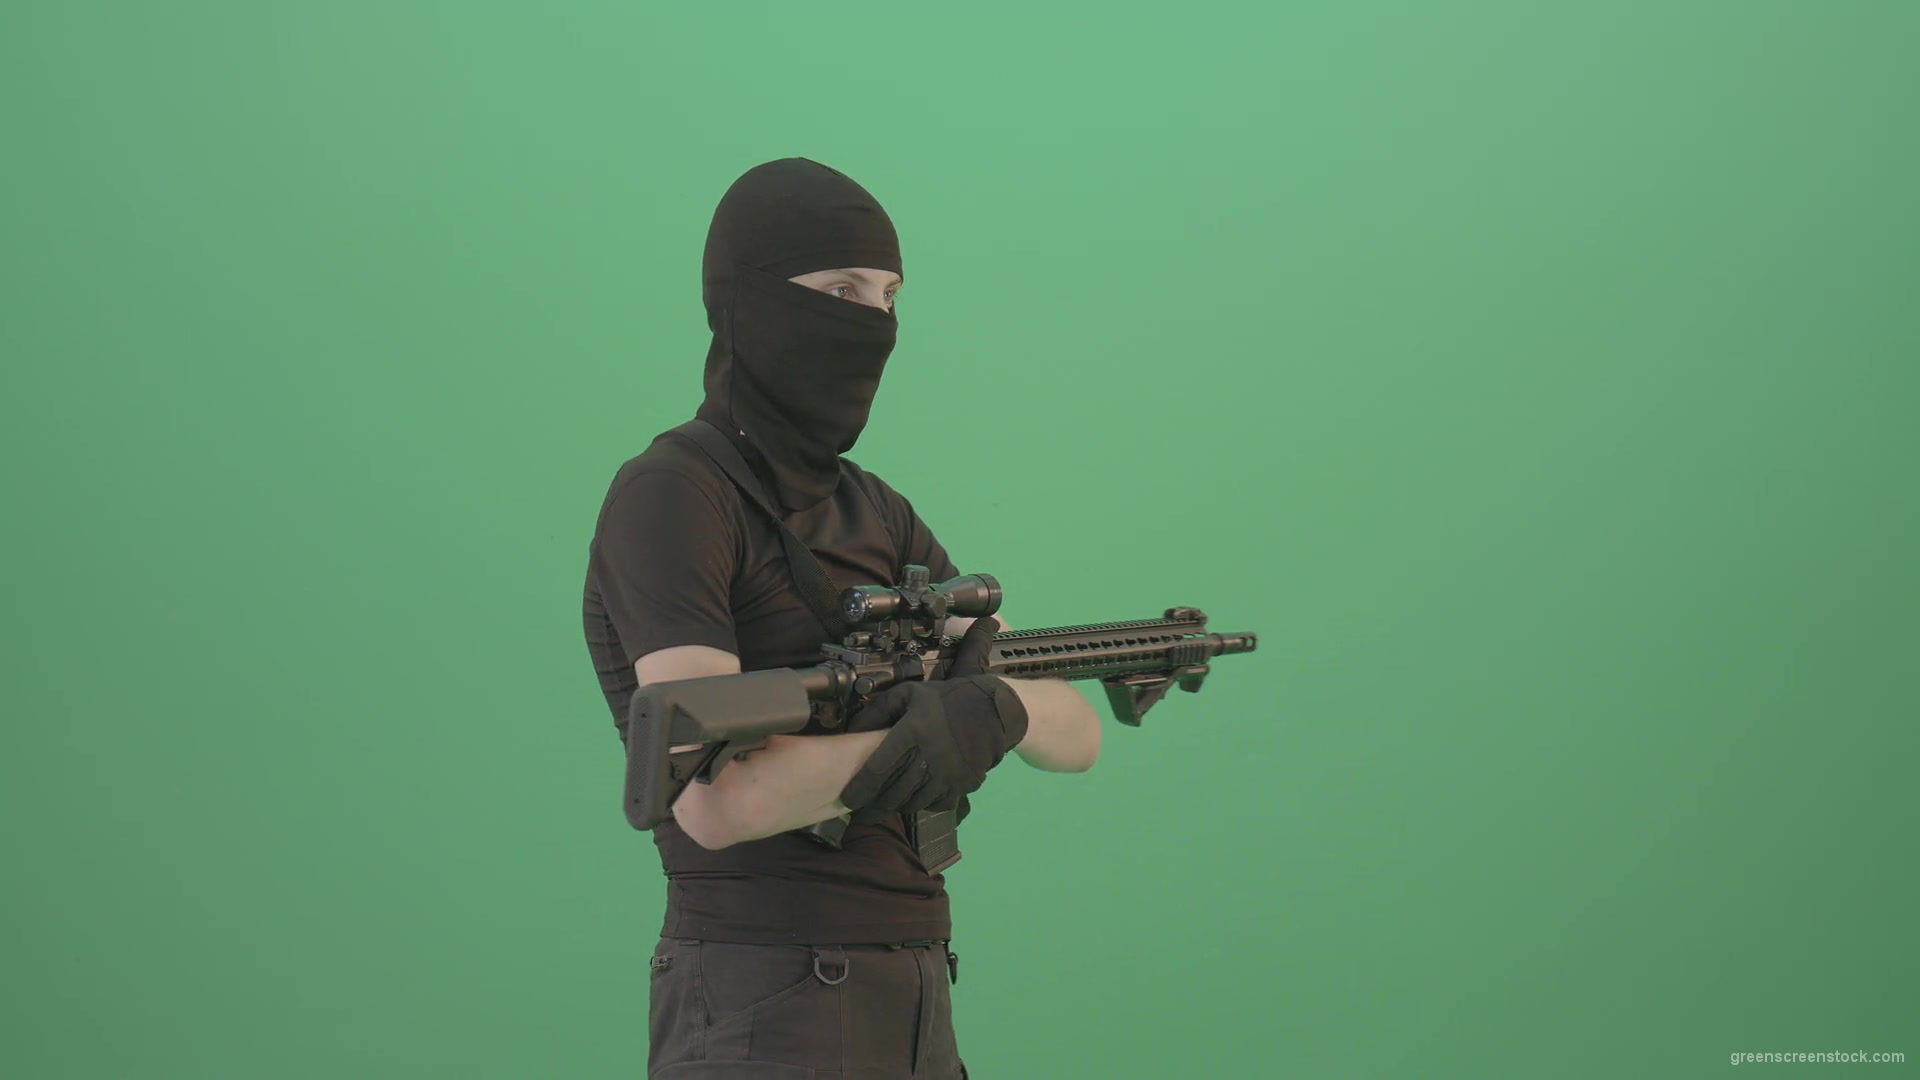 Soldier-man-with-weapon-looking-enemies-isolated-on-green-screen-4K-Video-Footage-1920_006 Green Screen Stock